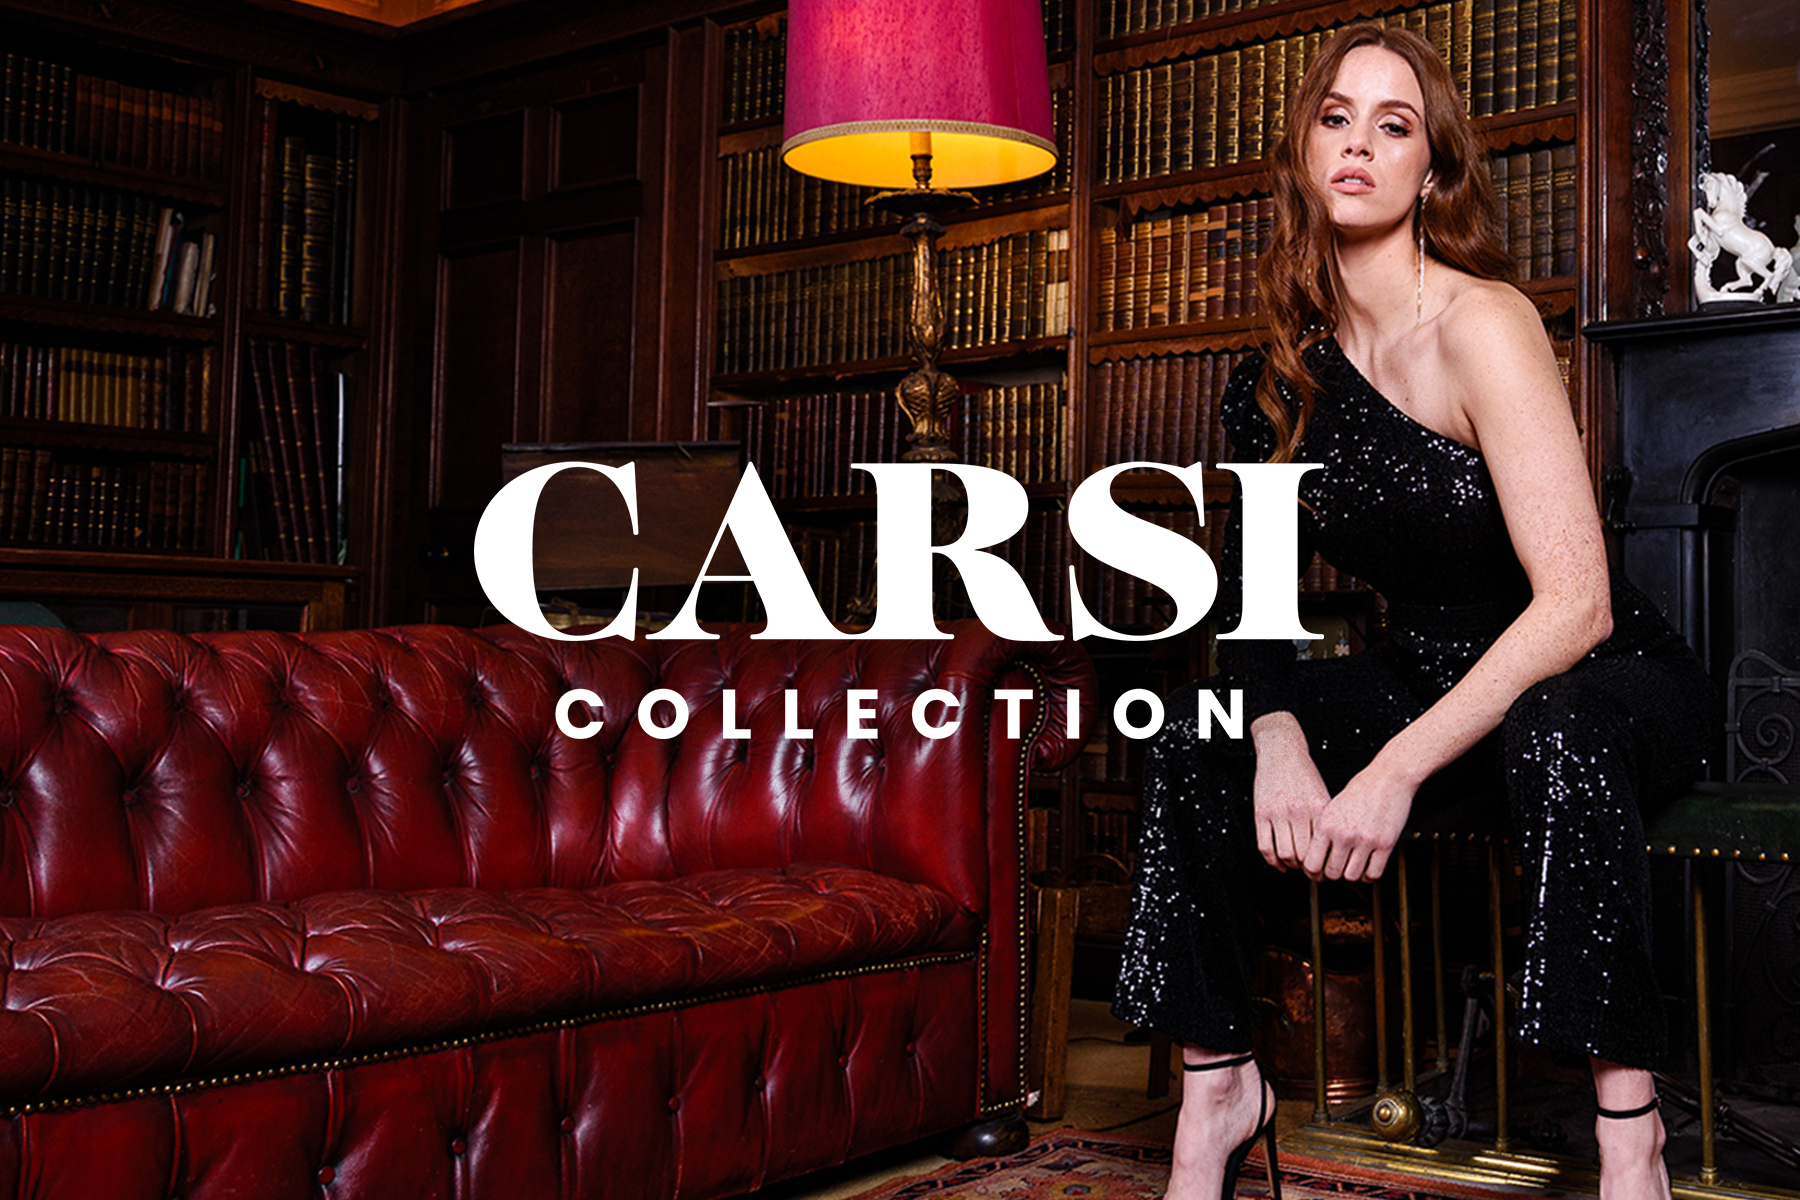 Carsi Collection Logo over Marketing Image